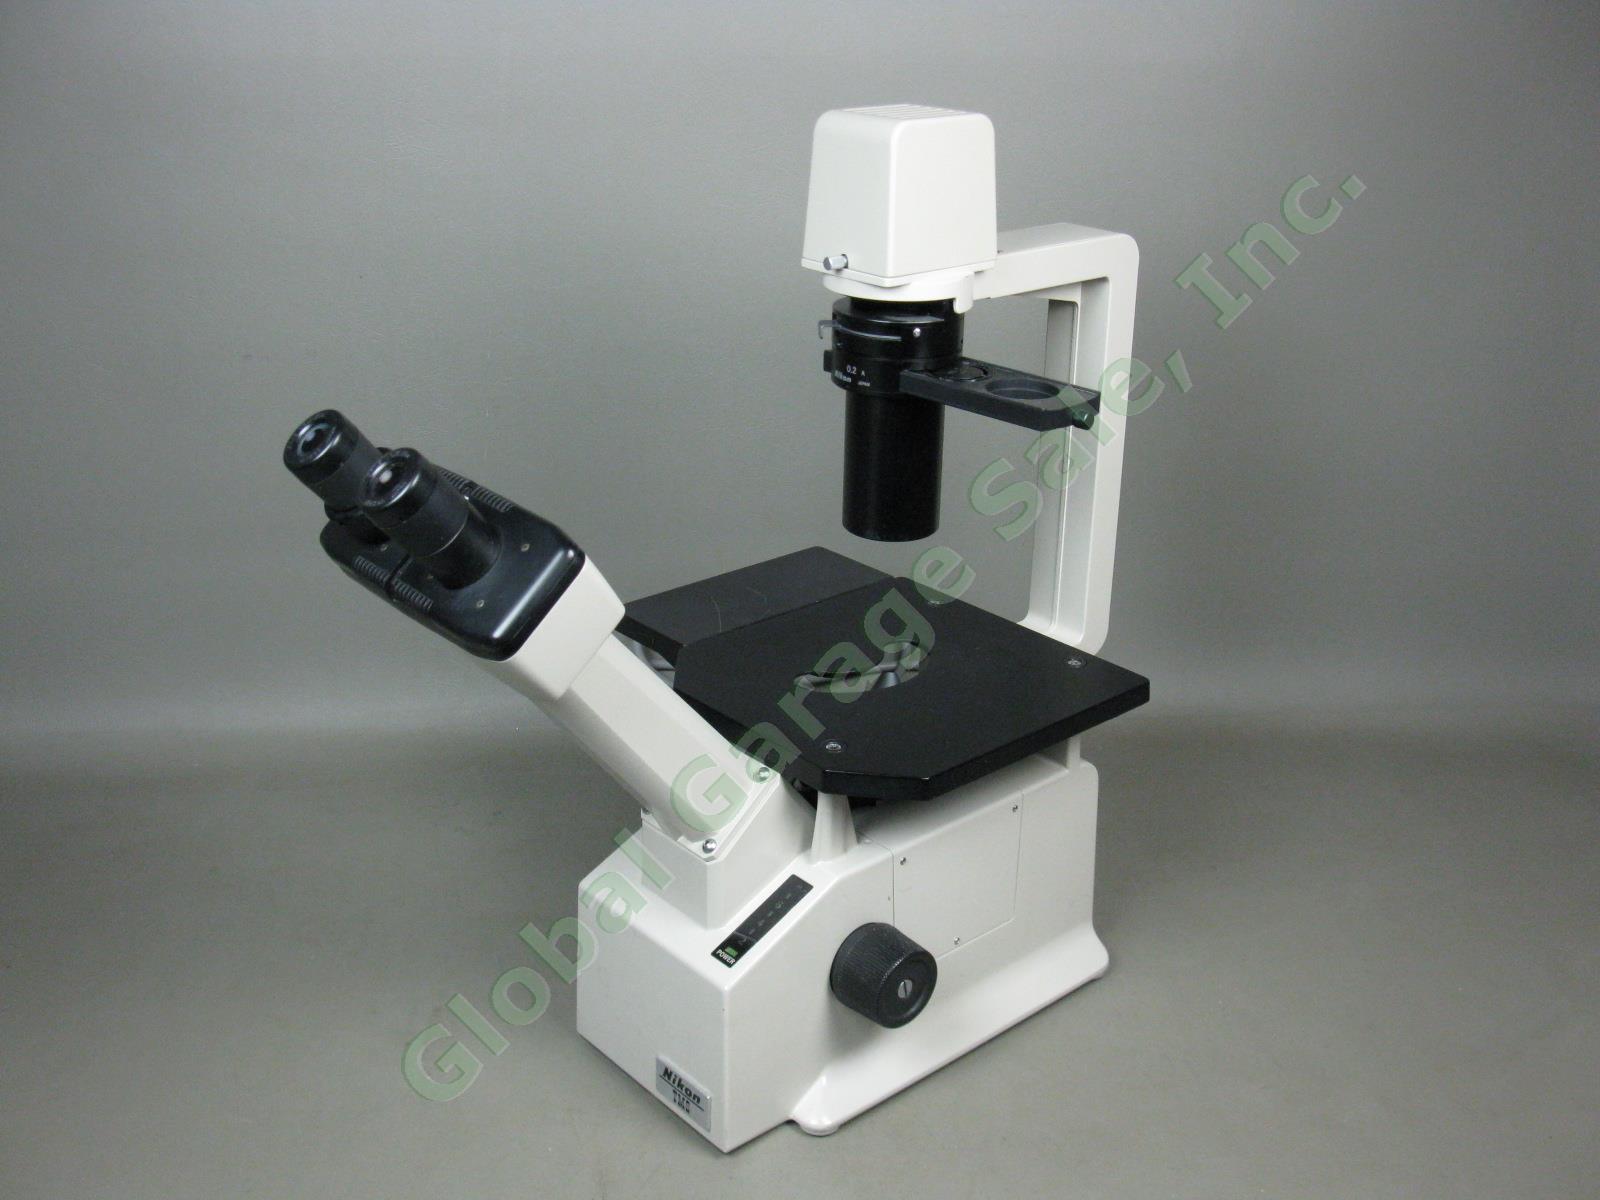 Nikon TMS Inverted Phase Contrast Microscope W/ 4 Objectives DLL 10 Ph 1-2 DL 20 1